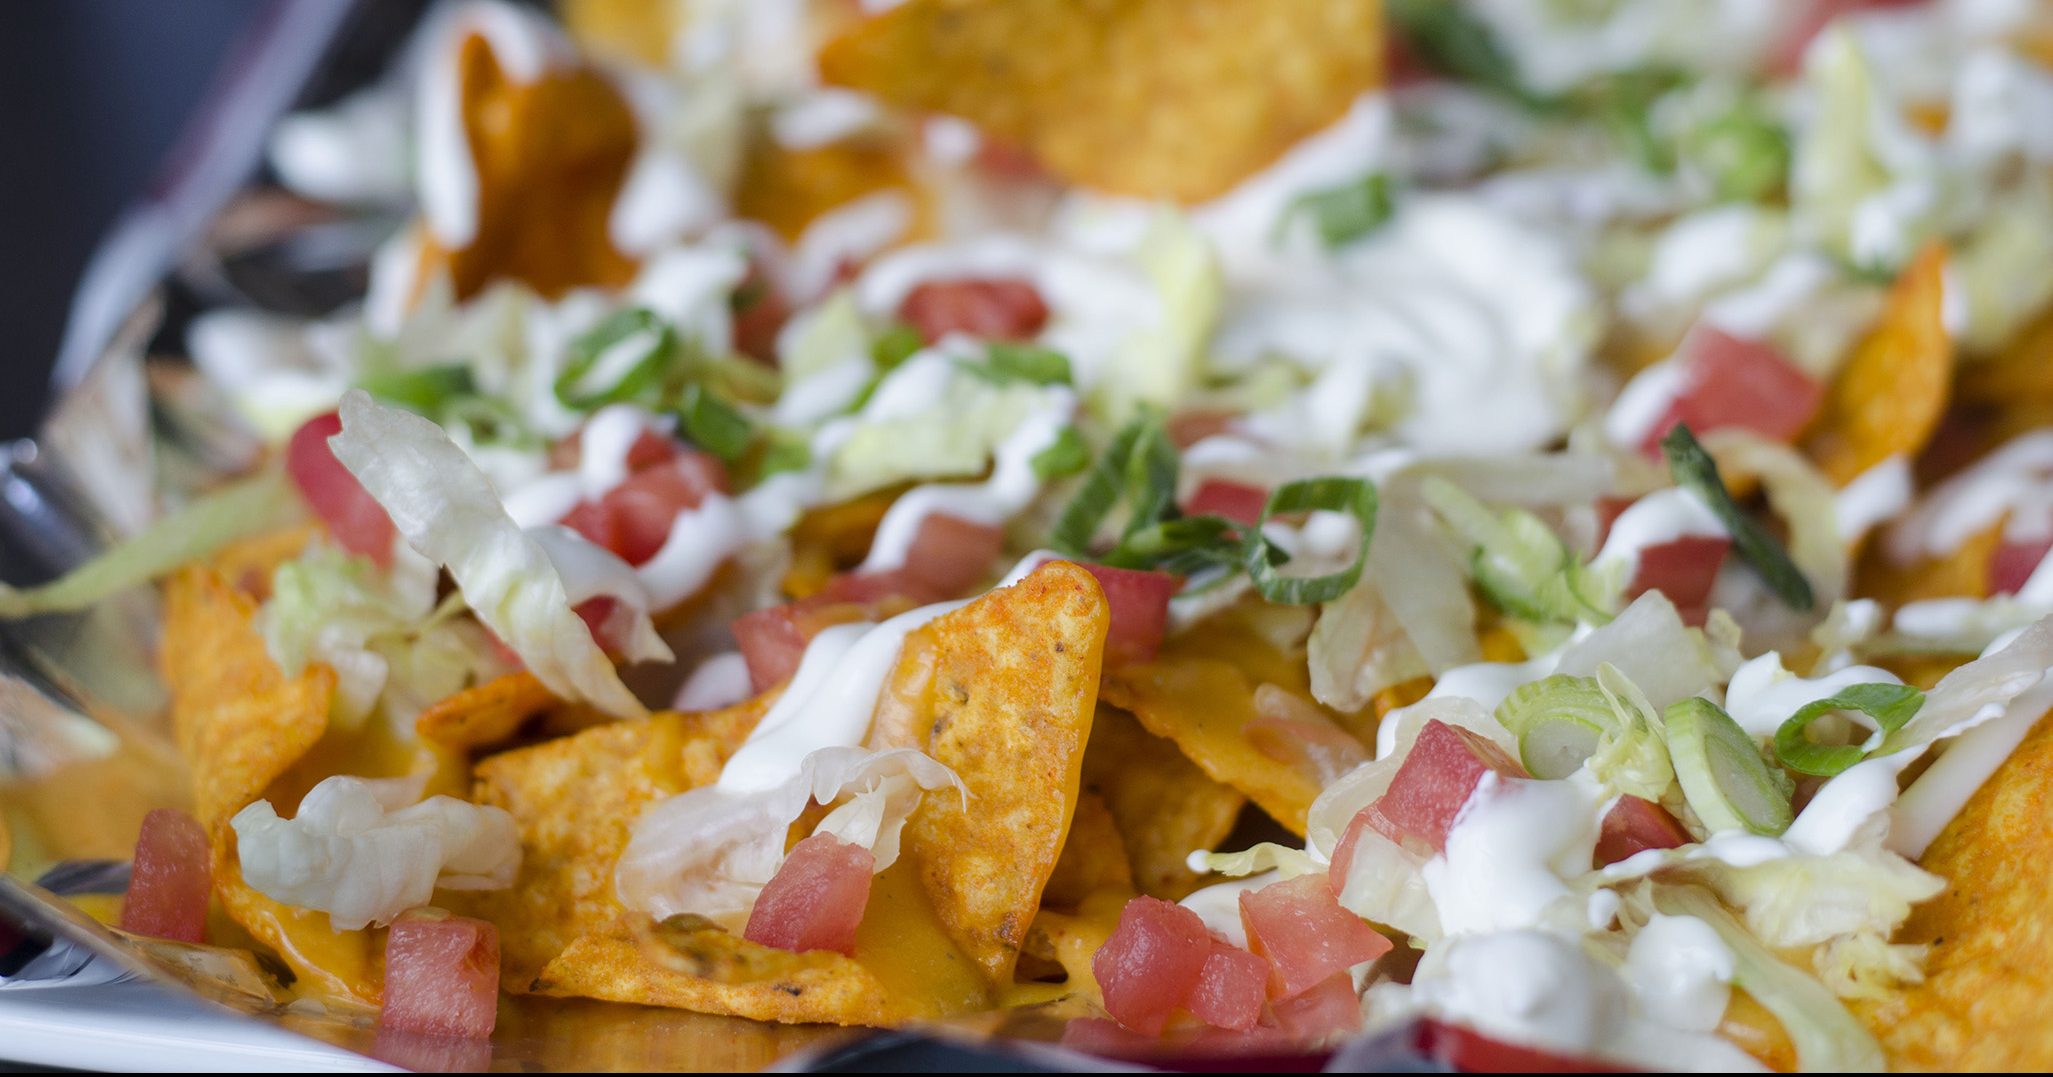 Dorito nachos from Eastwood's Grill & Lounge in Windsor, Ontario.